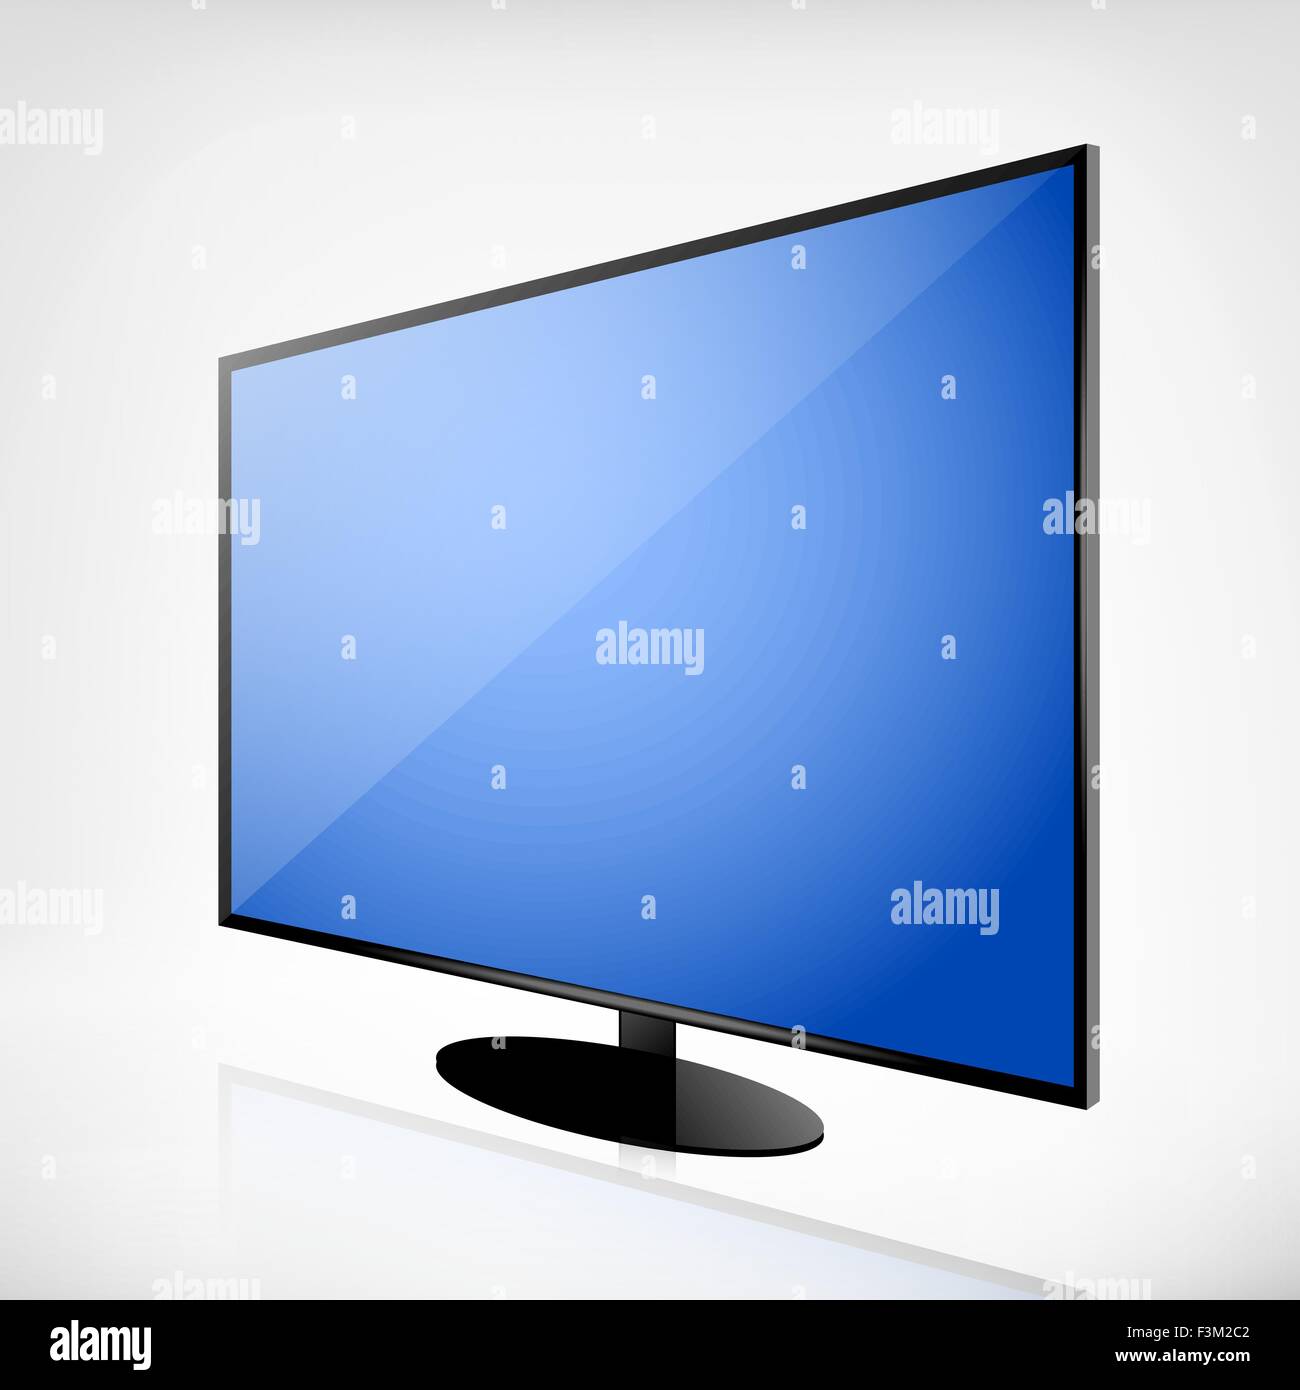 Metallic TV plasma with blue screen and reflection Stock Vector